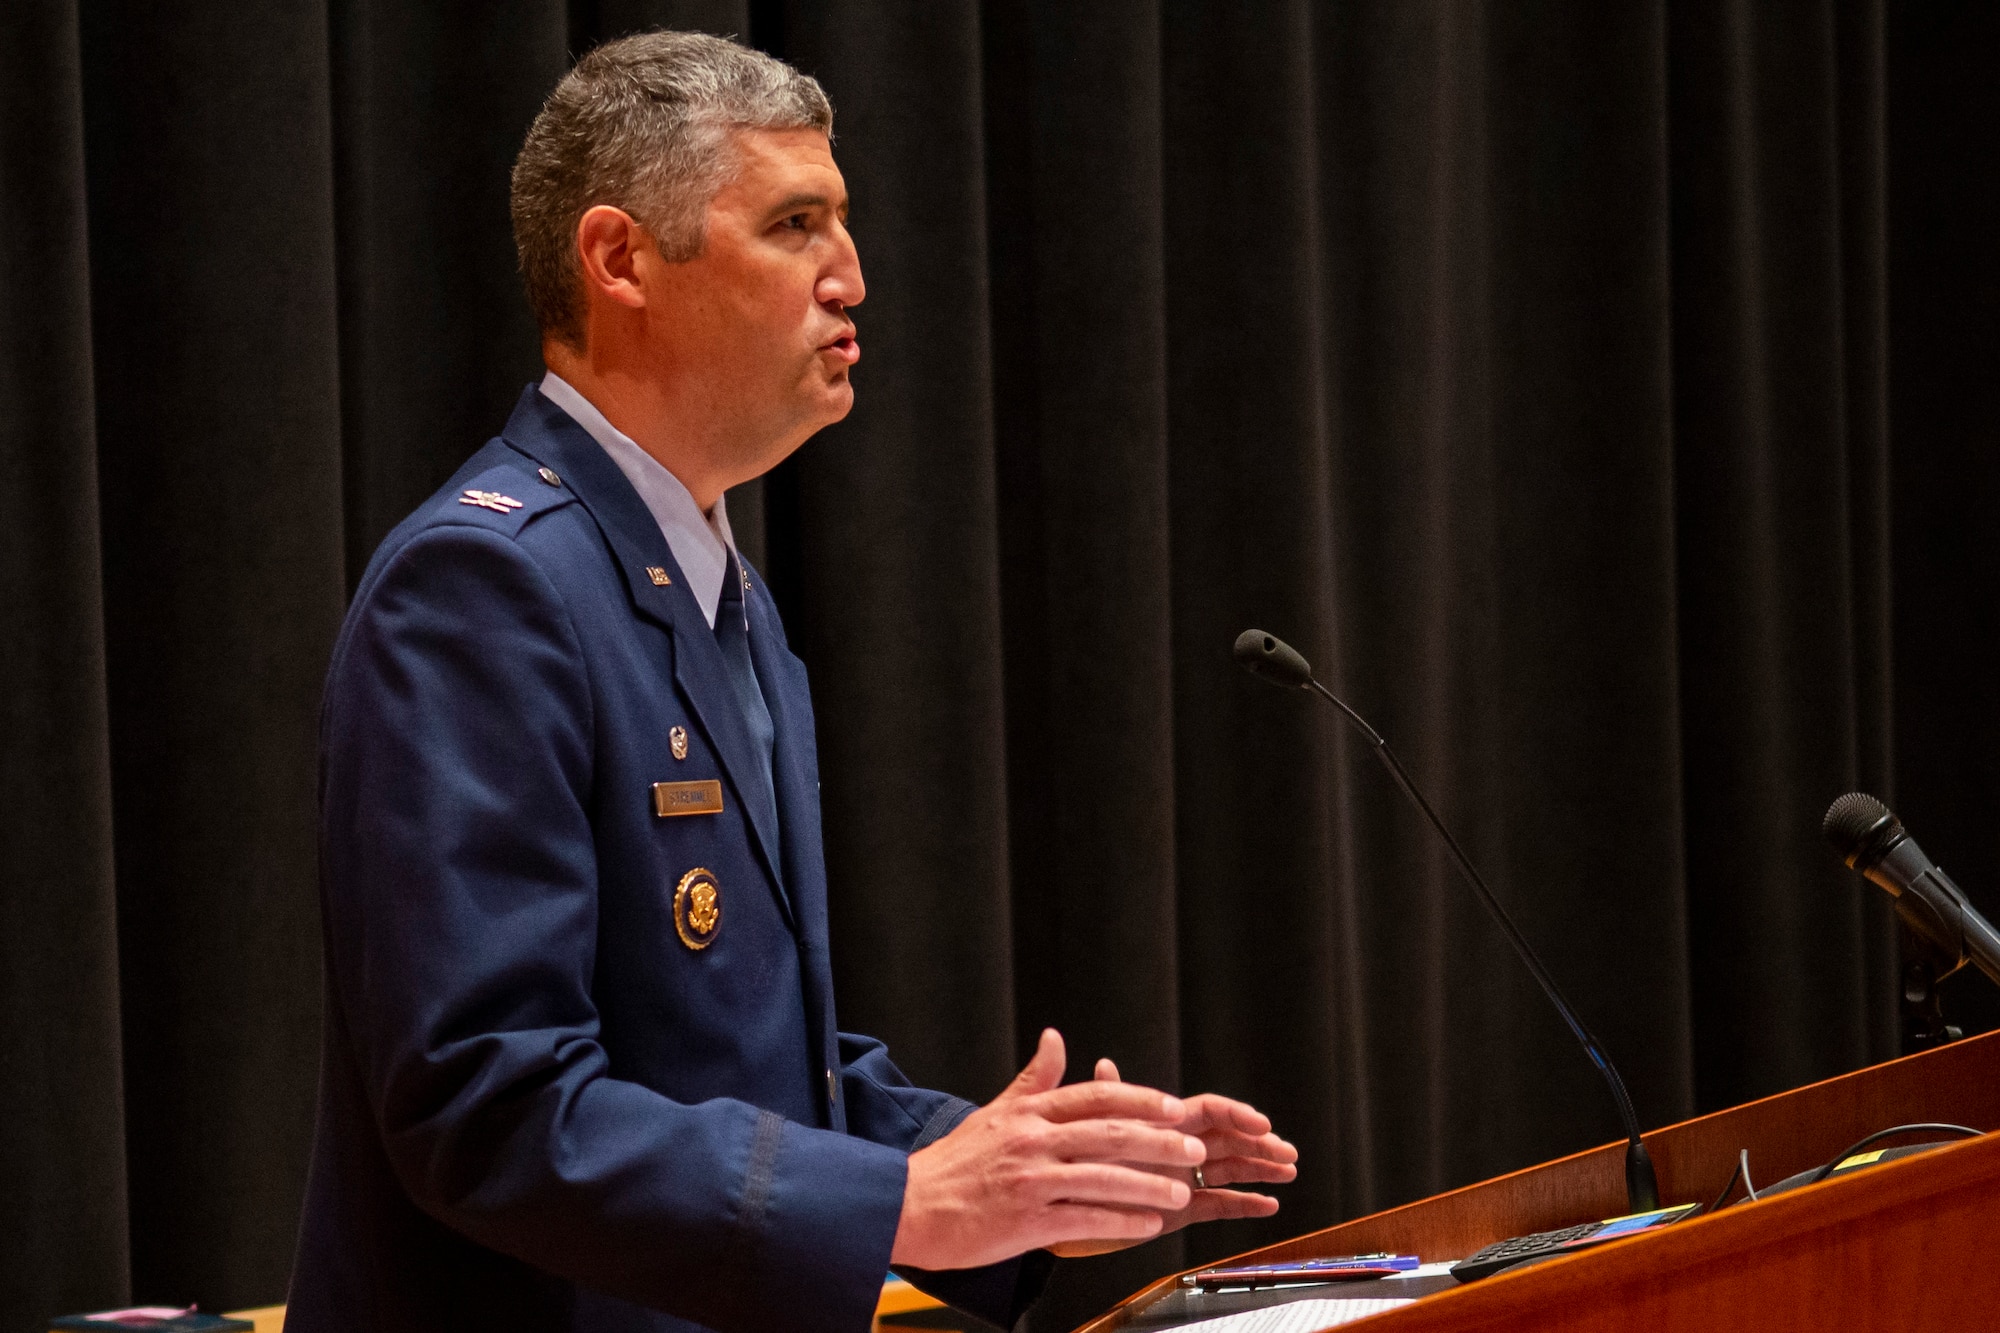 Col. Kenneth Stremmel, Global Exploitation Intelligence Group commander, gives the opening remarks at the Signals Analysis Squadron change of command ceremony here, June 22, 2022. The squadron’s mission is to exploit signals to prevent surprise, enable military operations, and protect national security. During the ceremony, Lt. Col. Axel A. Gonzalez took command from Lt. Col. Travis Kornahrens. (U.S. Air Force photo by Staff Sgt. Samuel Earick)